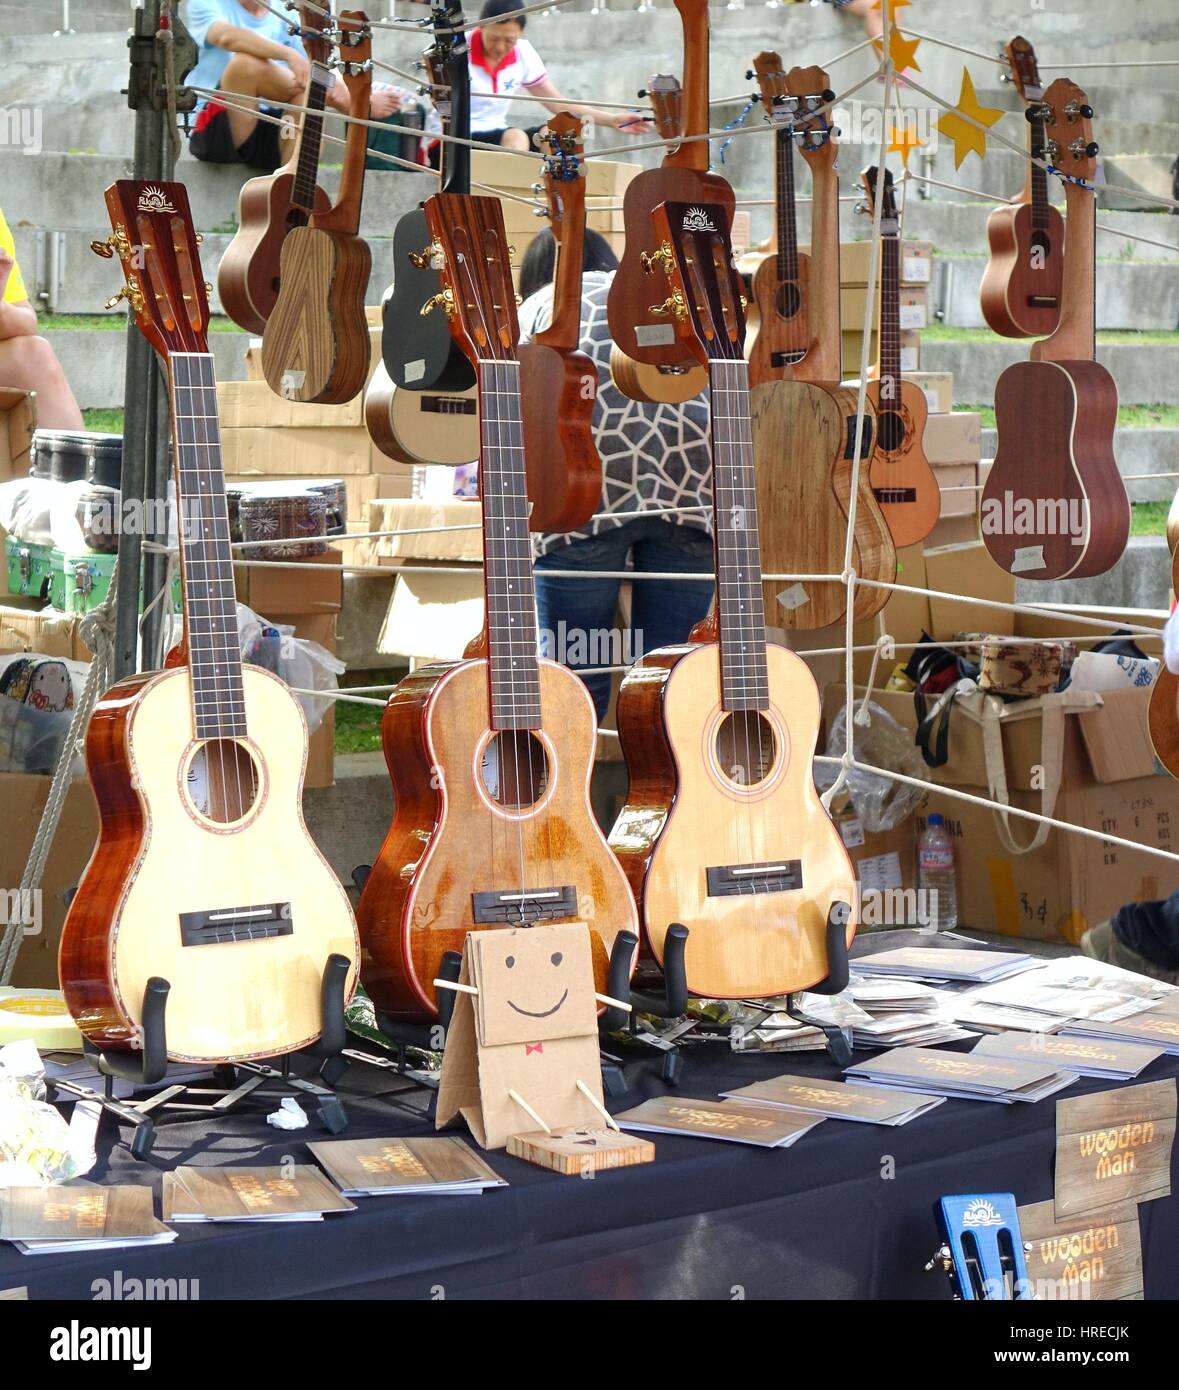 KAOHSIUNG, TAIWAN -- APRIL 23, 2016: Outdoor vendors sell musical string instruments at the 1st Pacific Rim Ukulele Festival, a free public outdoor ev Stock Photo